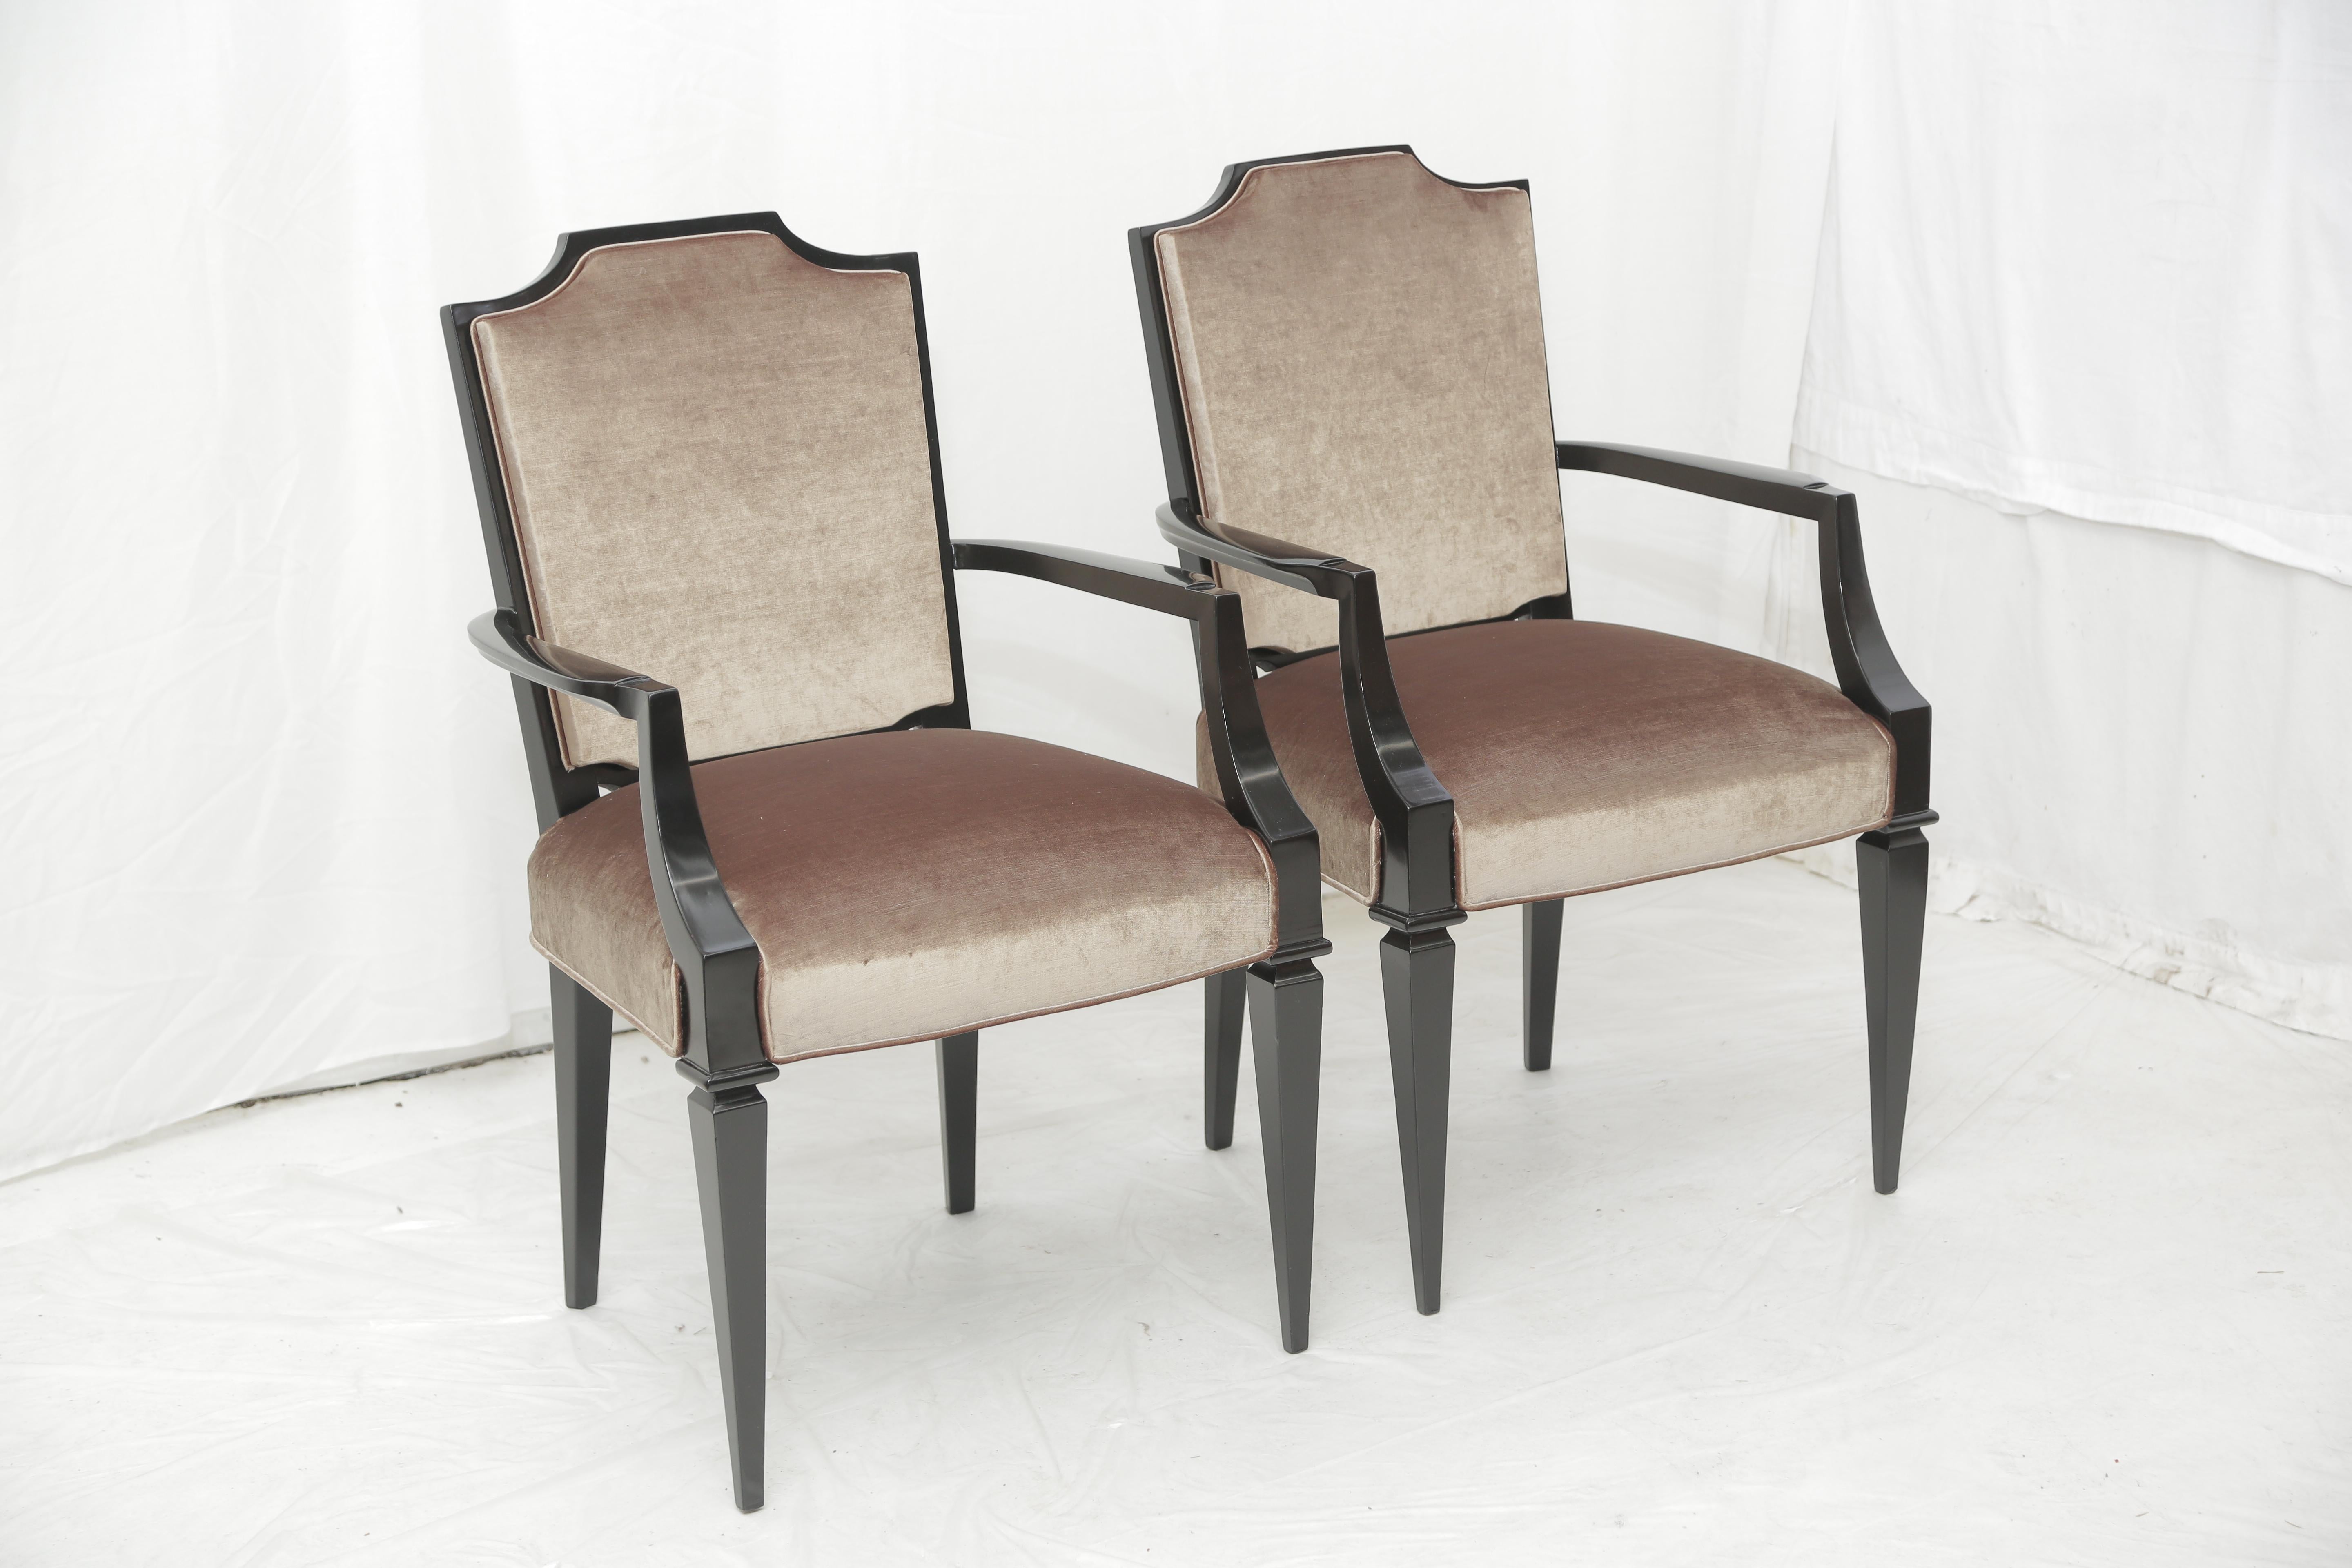 Set of four armchairs from the late Art Deco period in the style of André Arbus. Lacquered in a semi gloss black color, circa 1940.
The chairs have been recently reupholstered in a beige velvet fabric. The details of the wood frame are